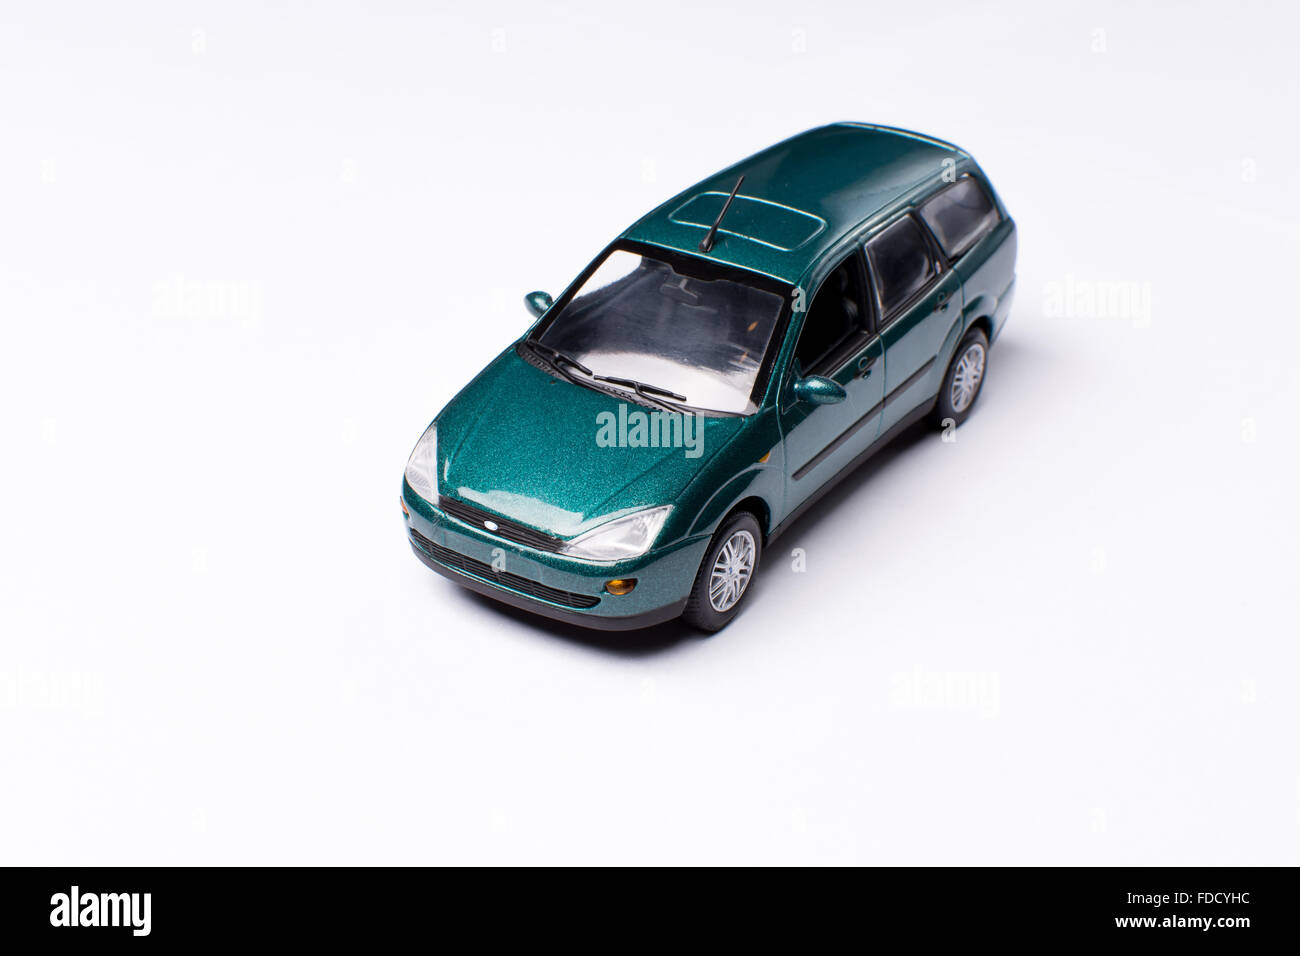 A scaled down model of a car (cars) shot on white background Stock Photo